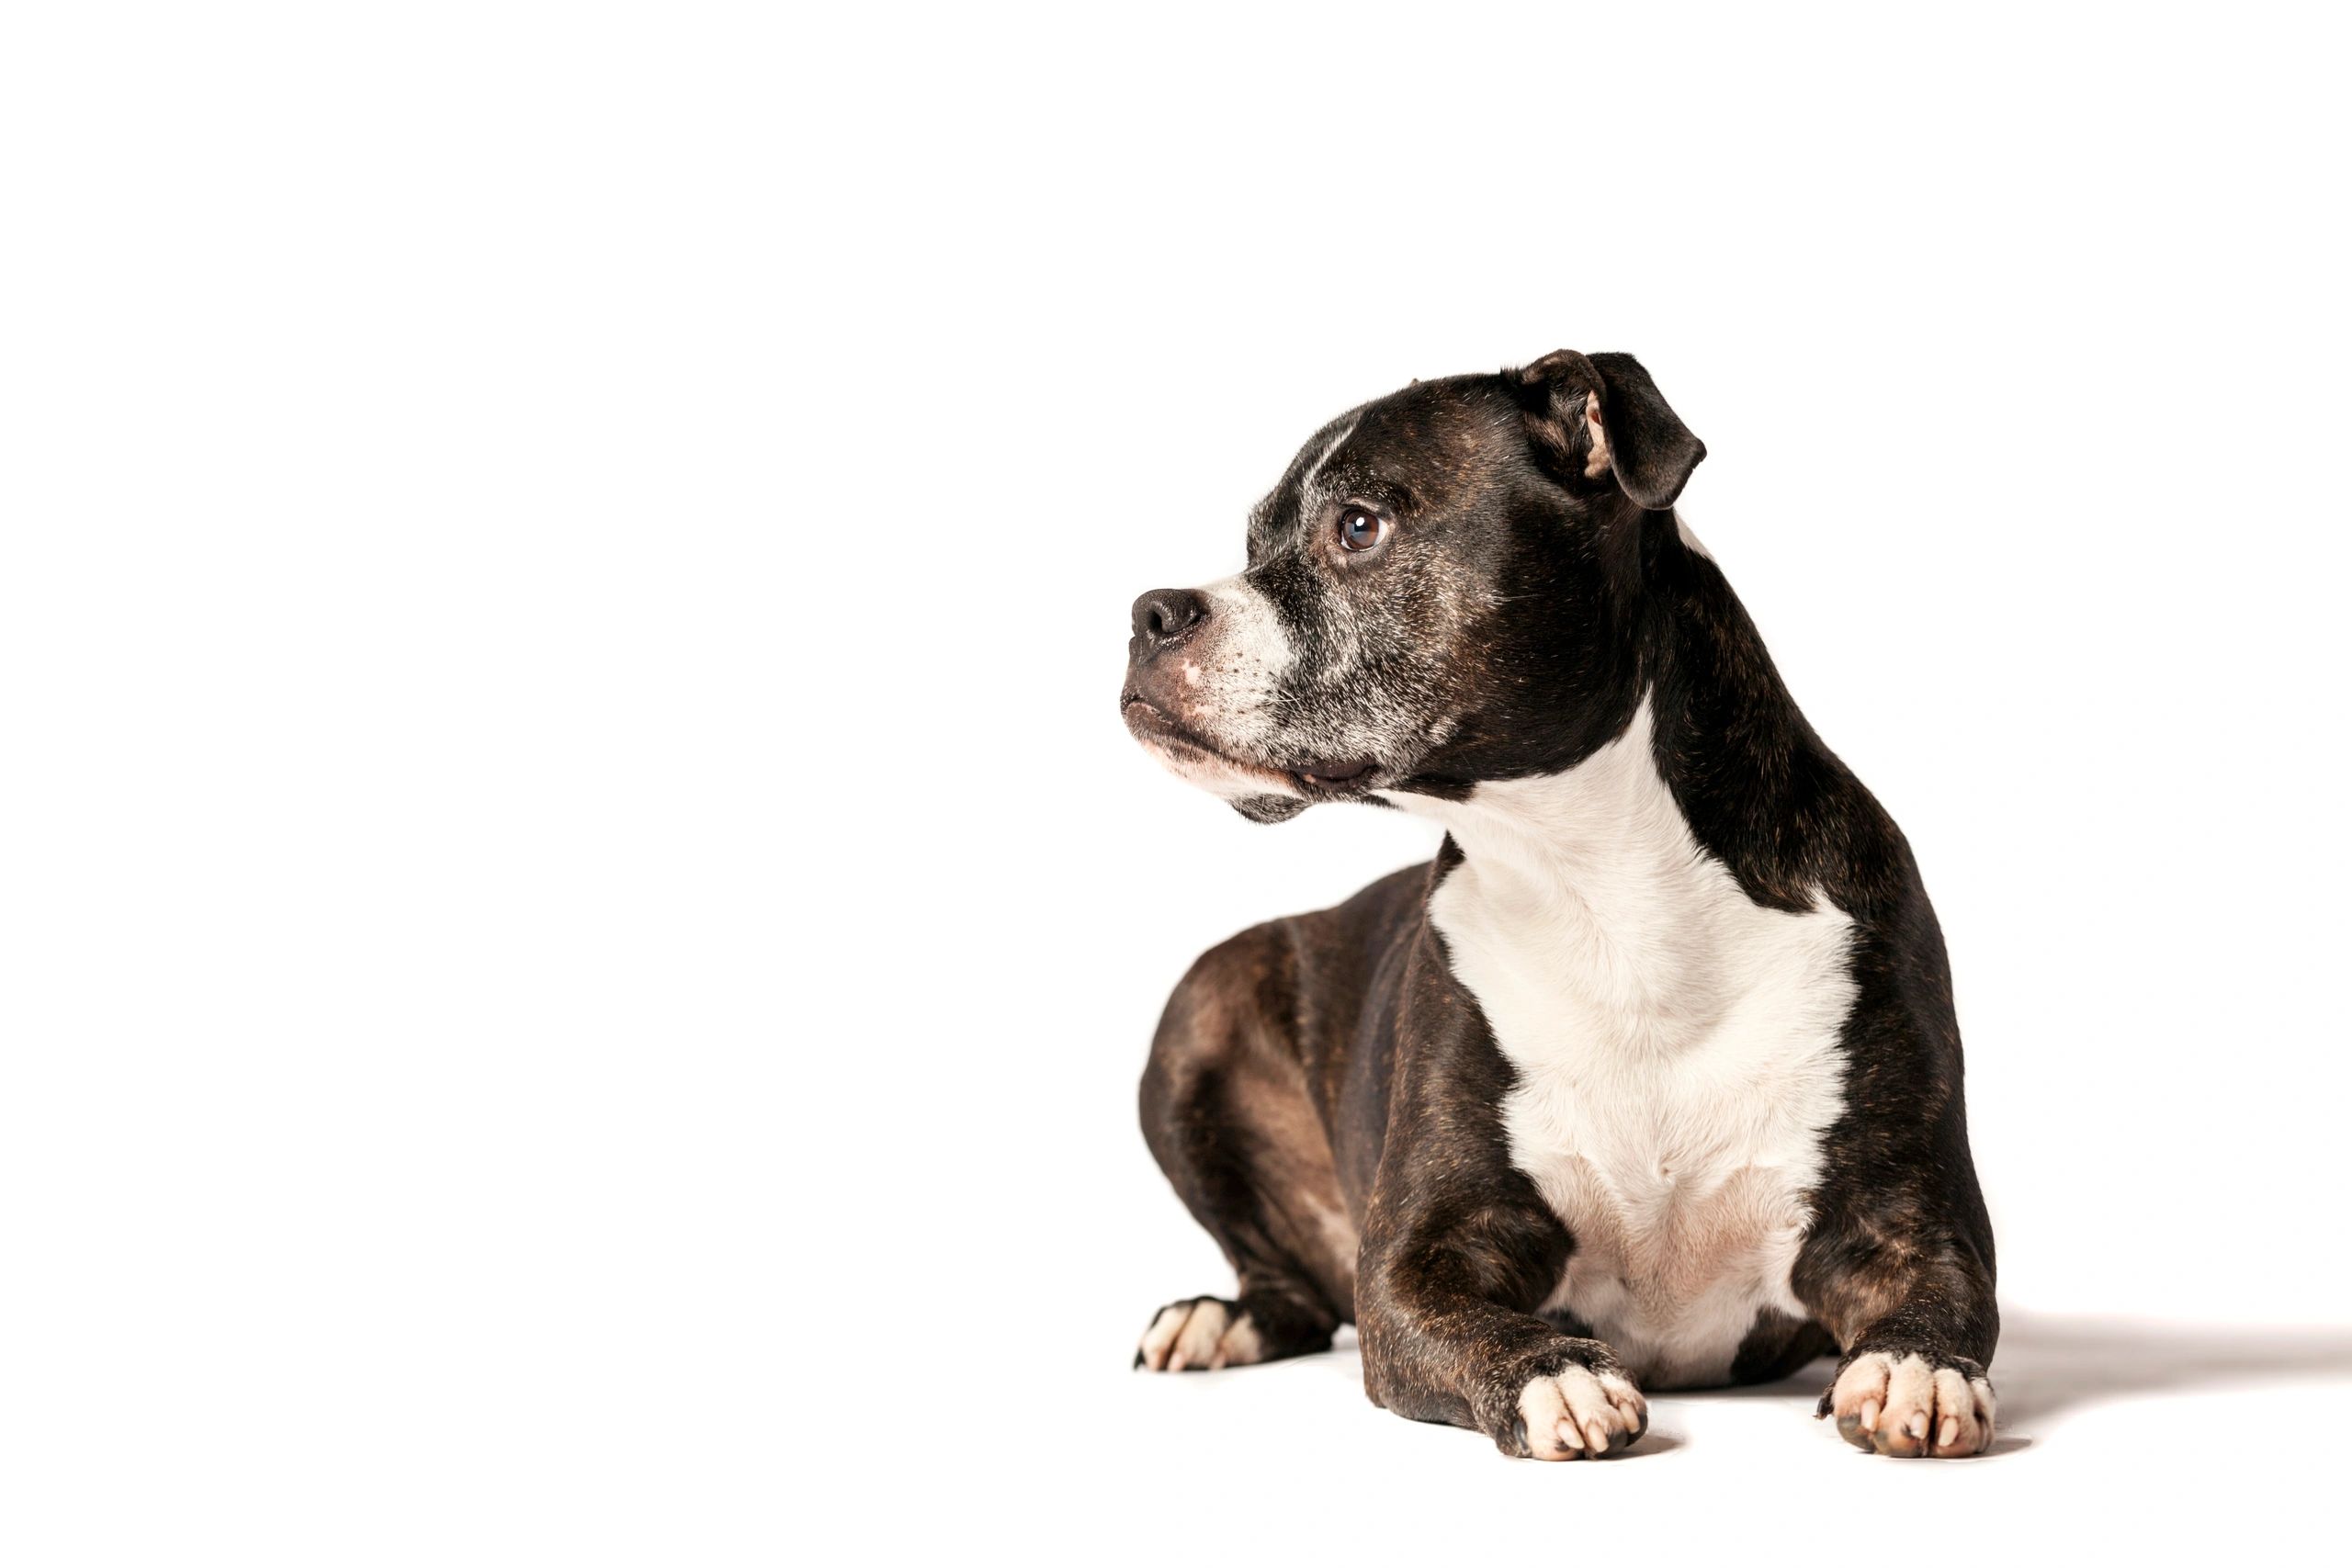 Photograph of a small black dog with a greying muzzle and soulful eyes on a white background.